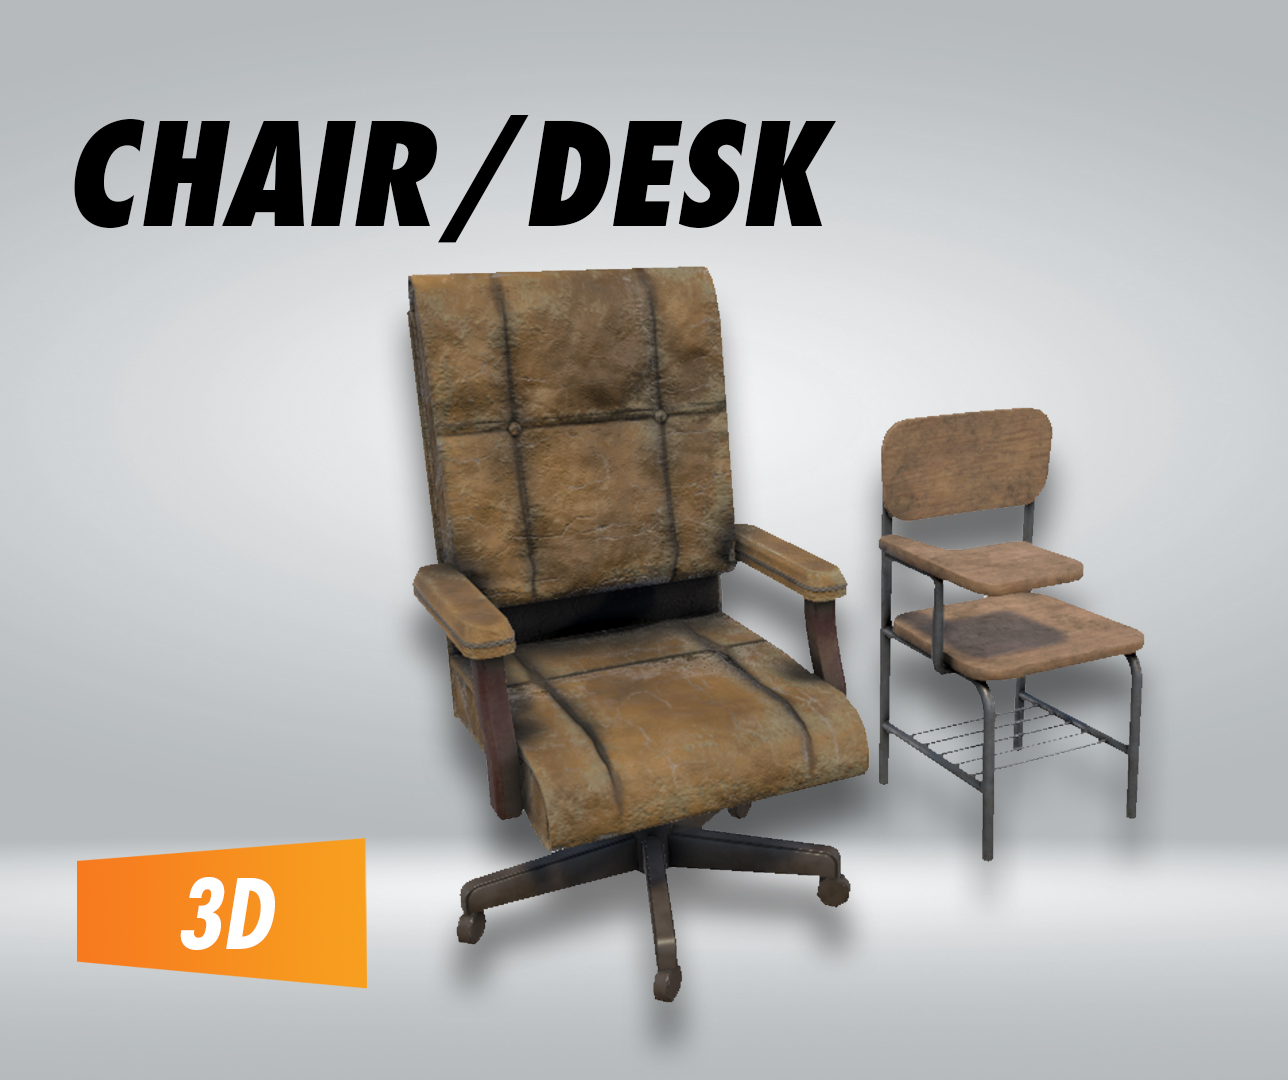 Office Chair/Classroom Desk – Filebase for Unity